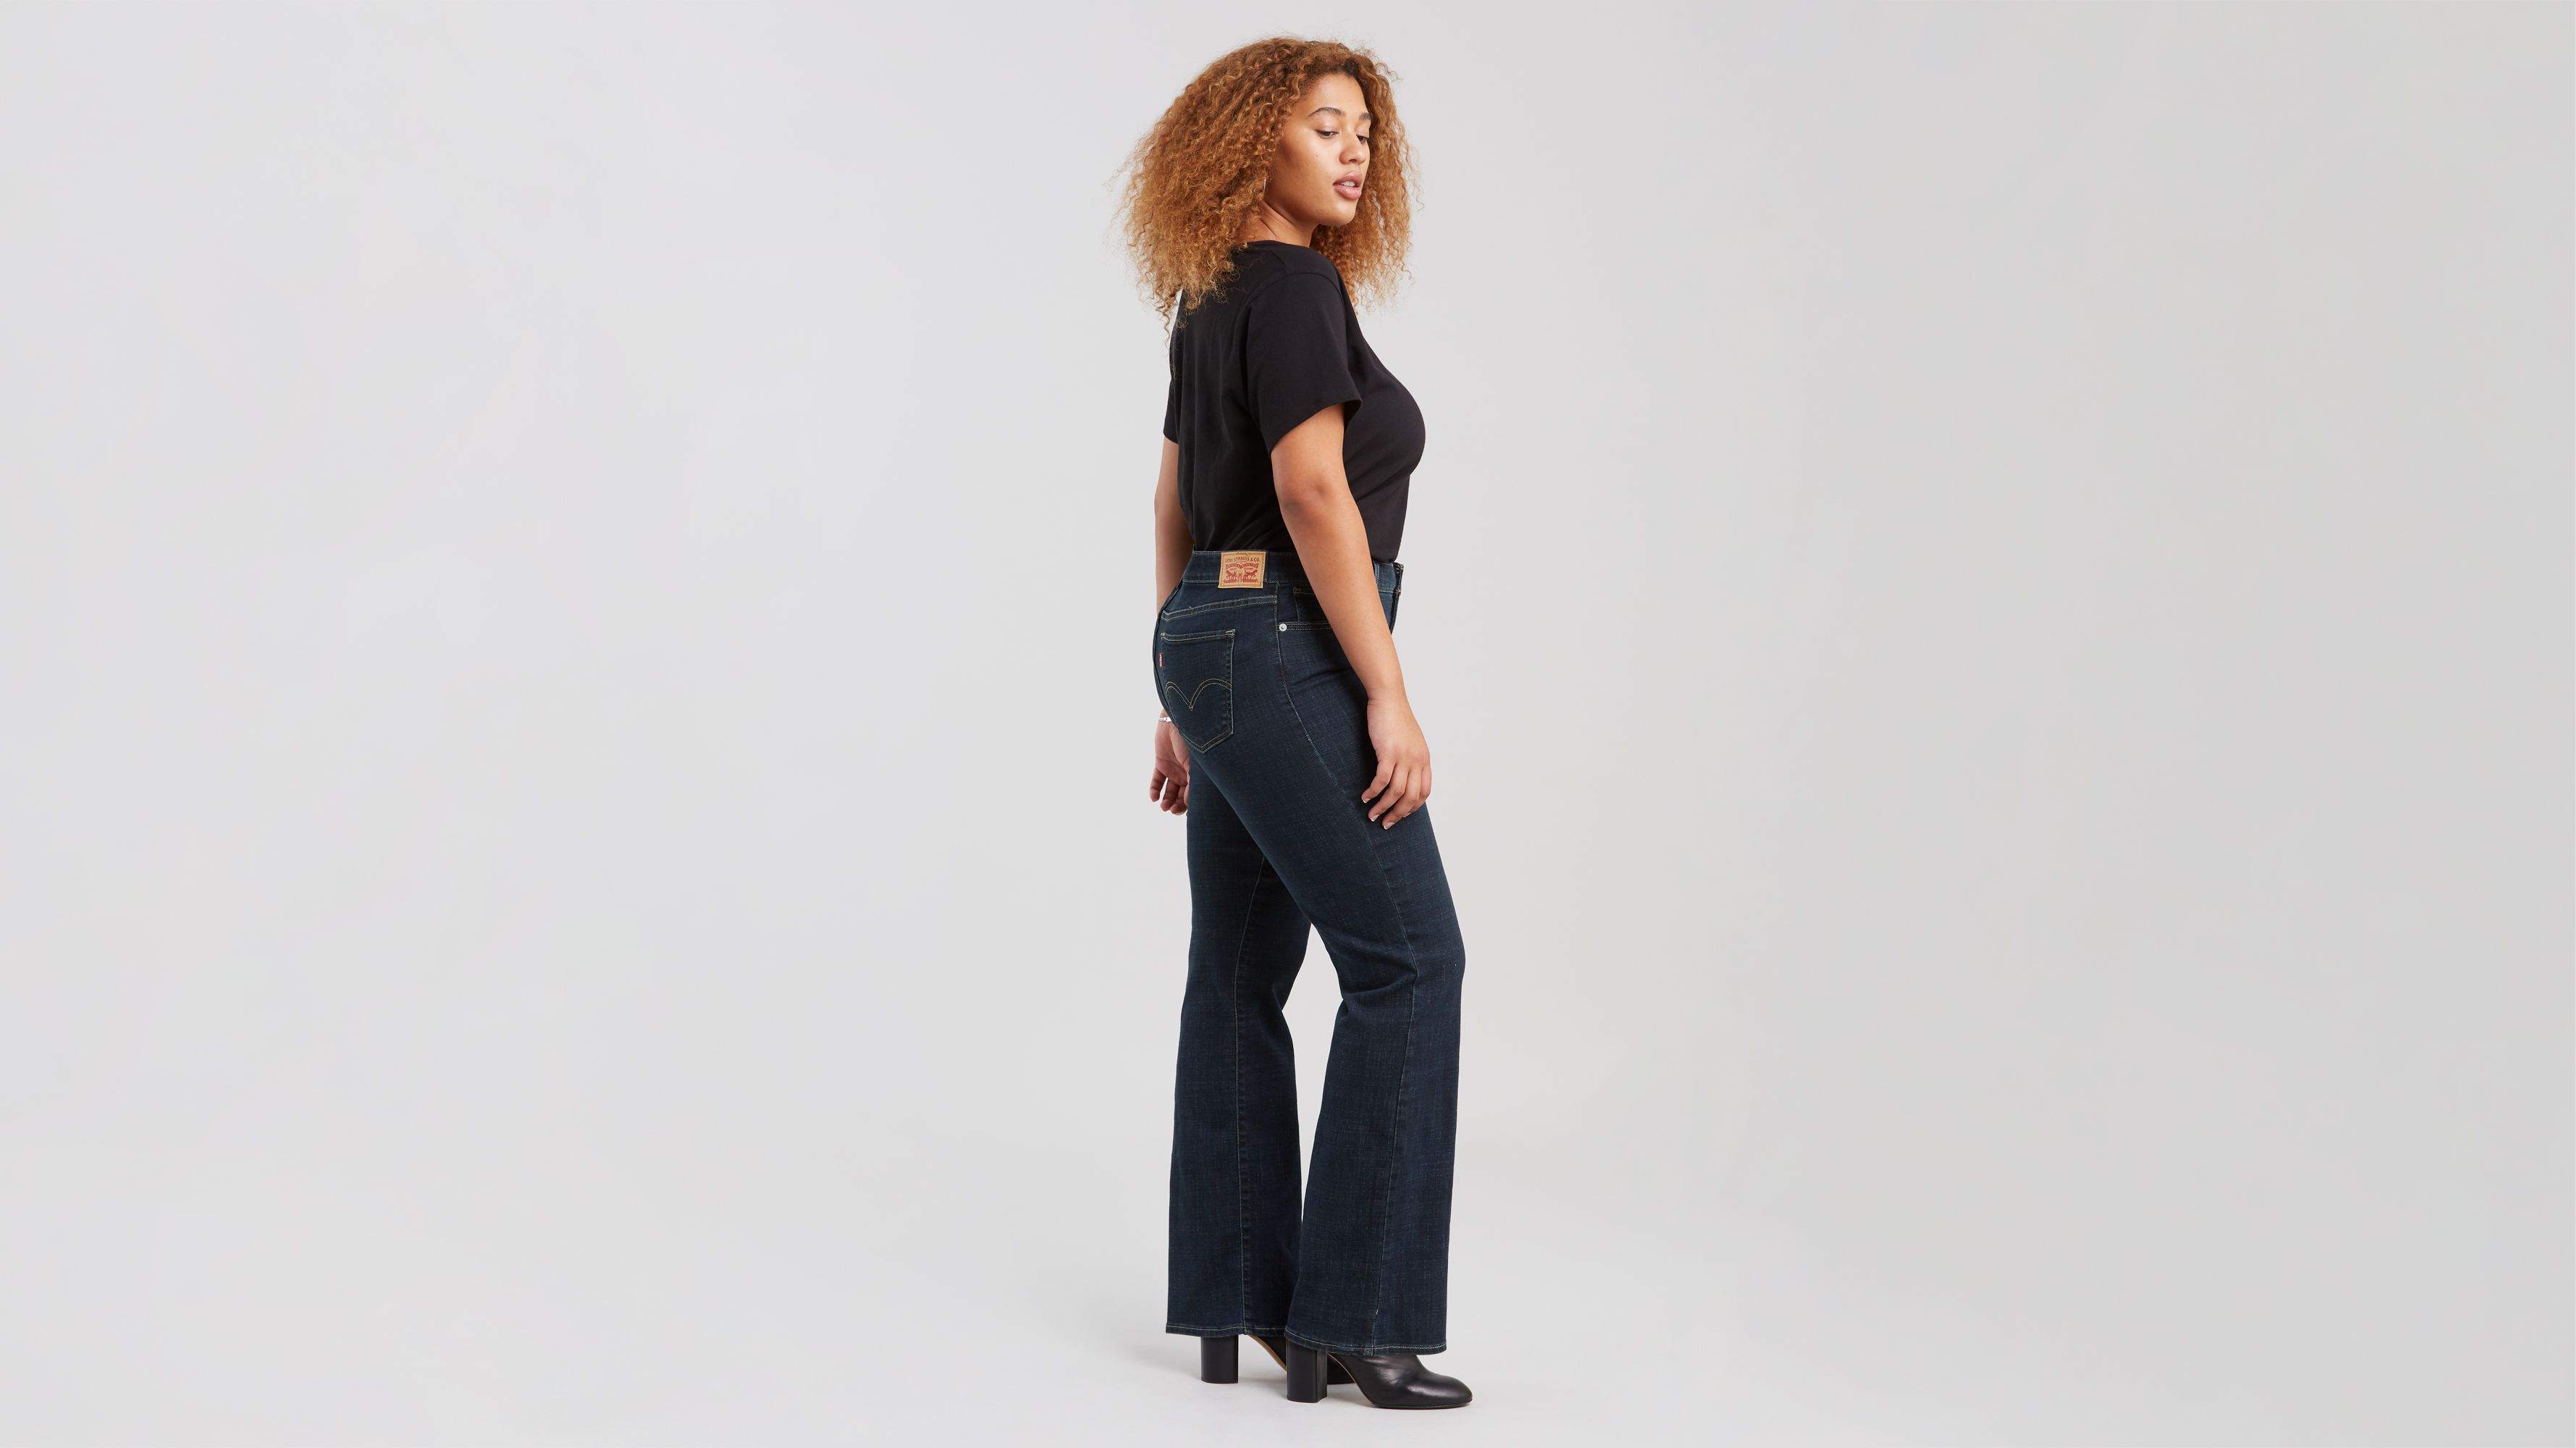 Buy Infinite Fit High Rise Bootcut Jeans Plus Size for CAD 88.00